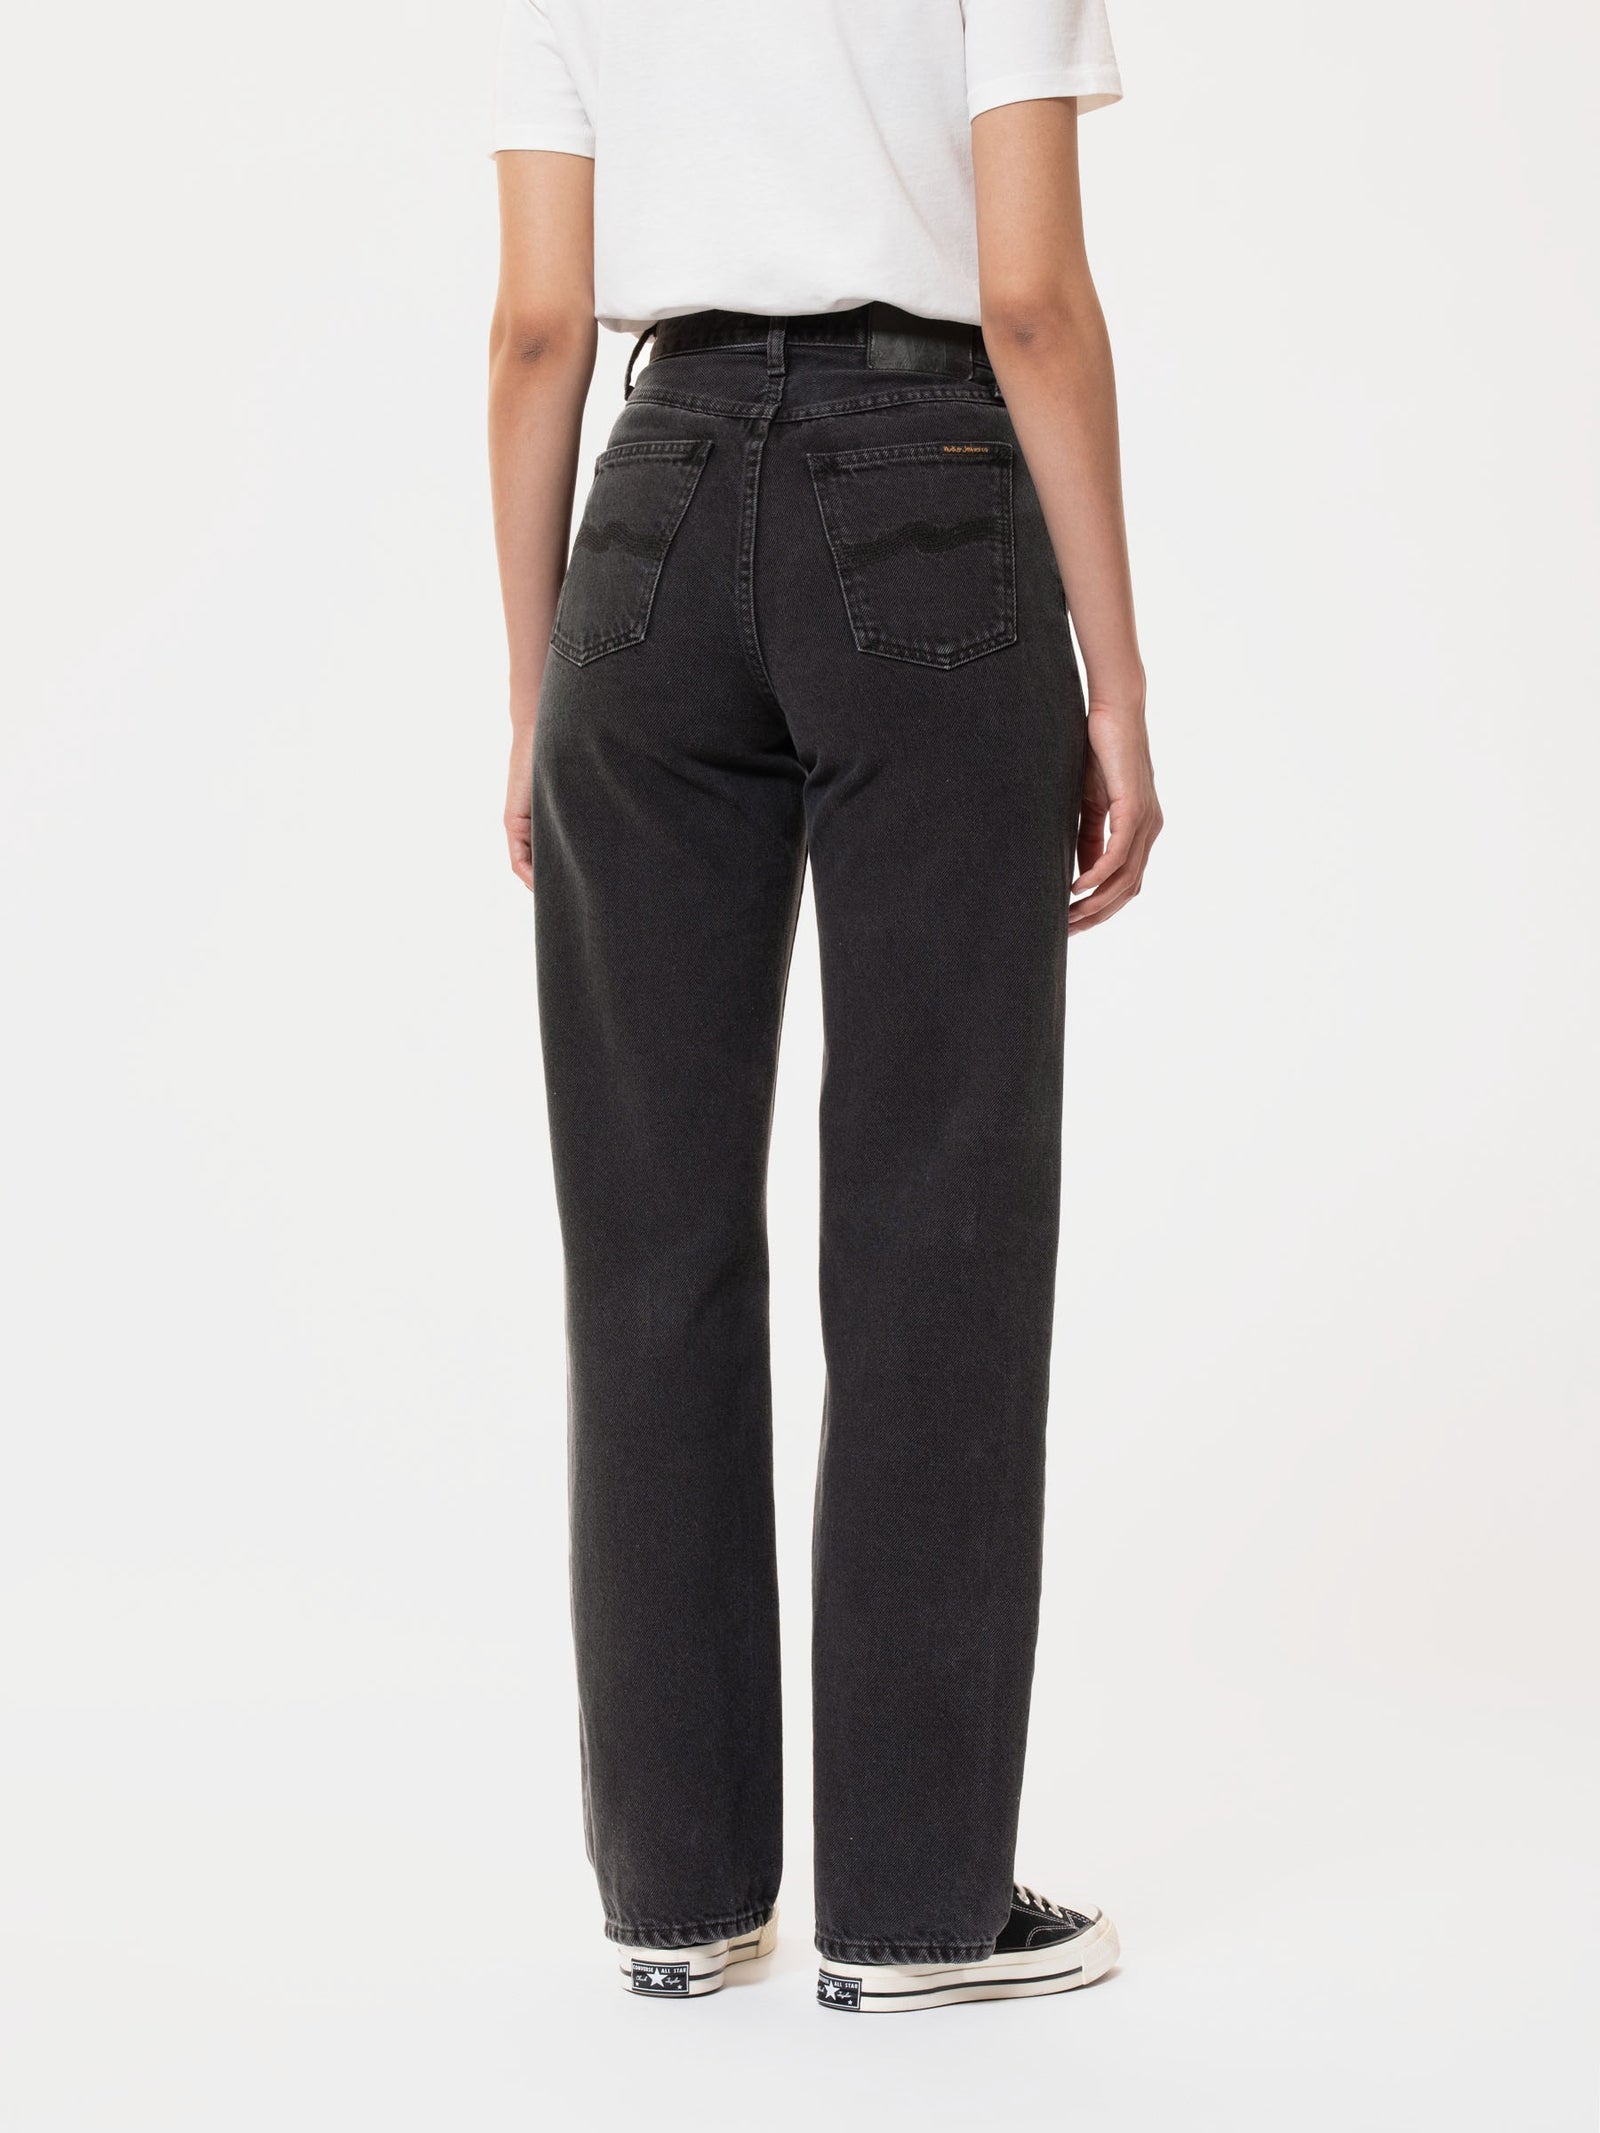 Nudie - Clean Eileen Jean - Washed Out Black